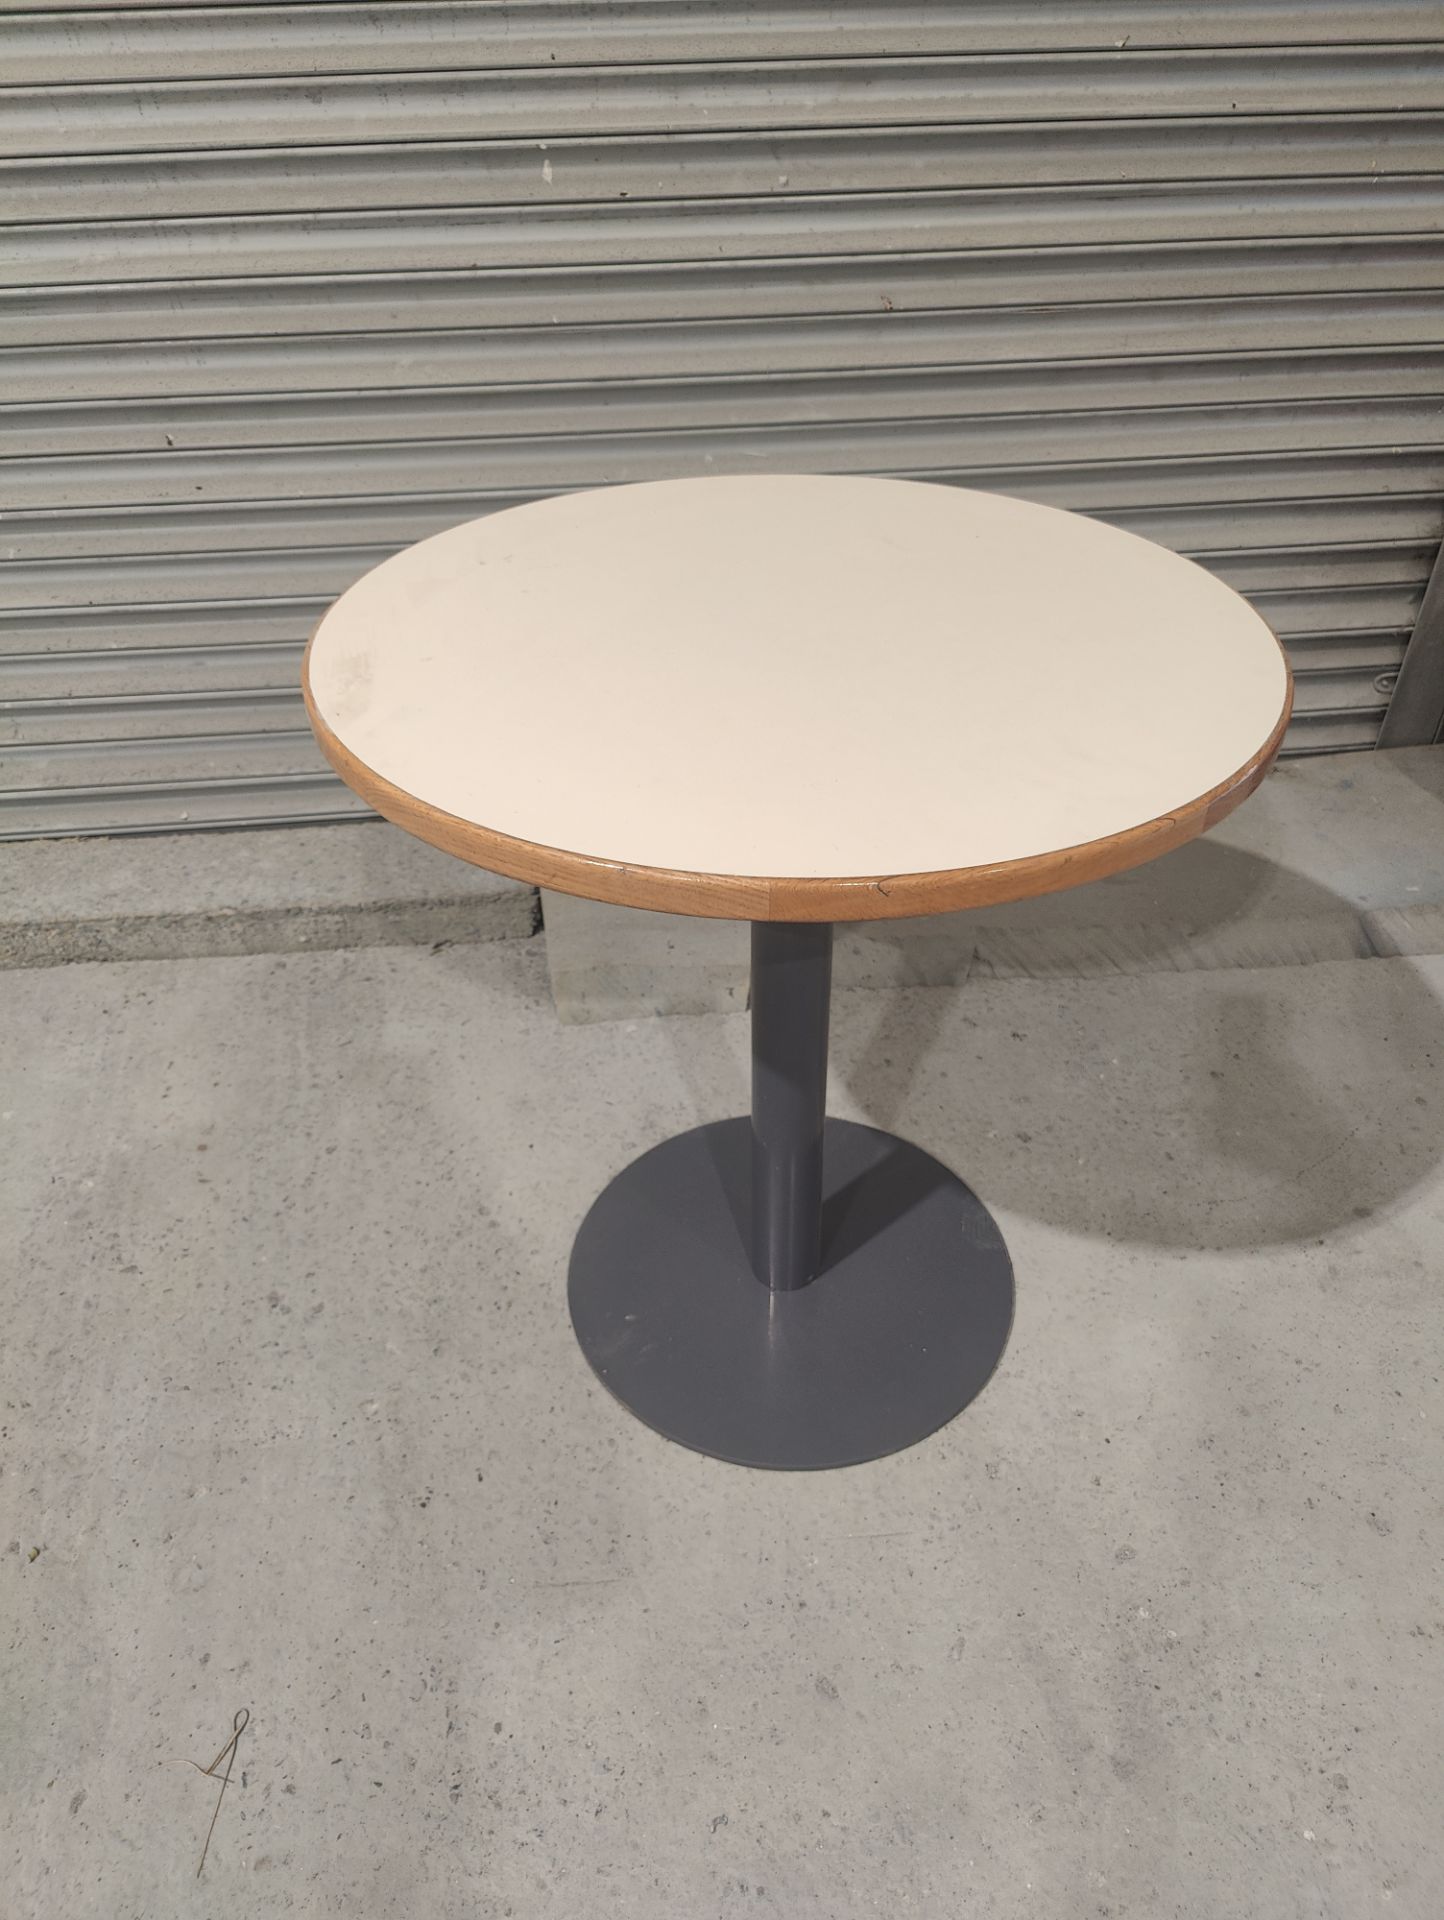 VERY HEAVY DUTY METAL AND WOOD TABLE. VERY SOLID H-80CM X 76CM DIAMETER APPROX